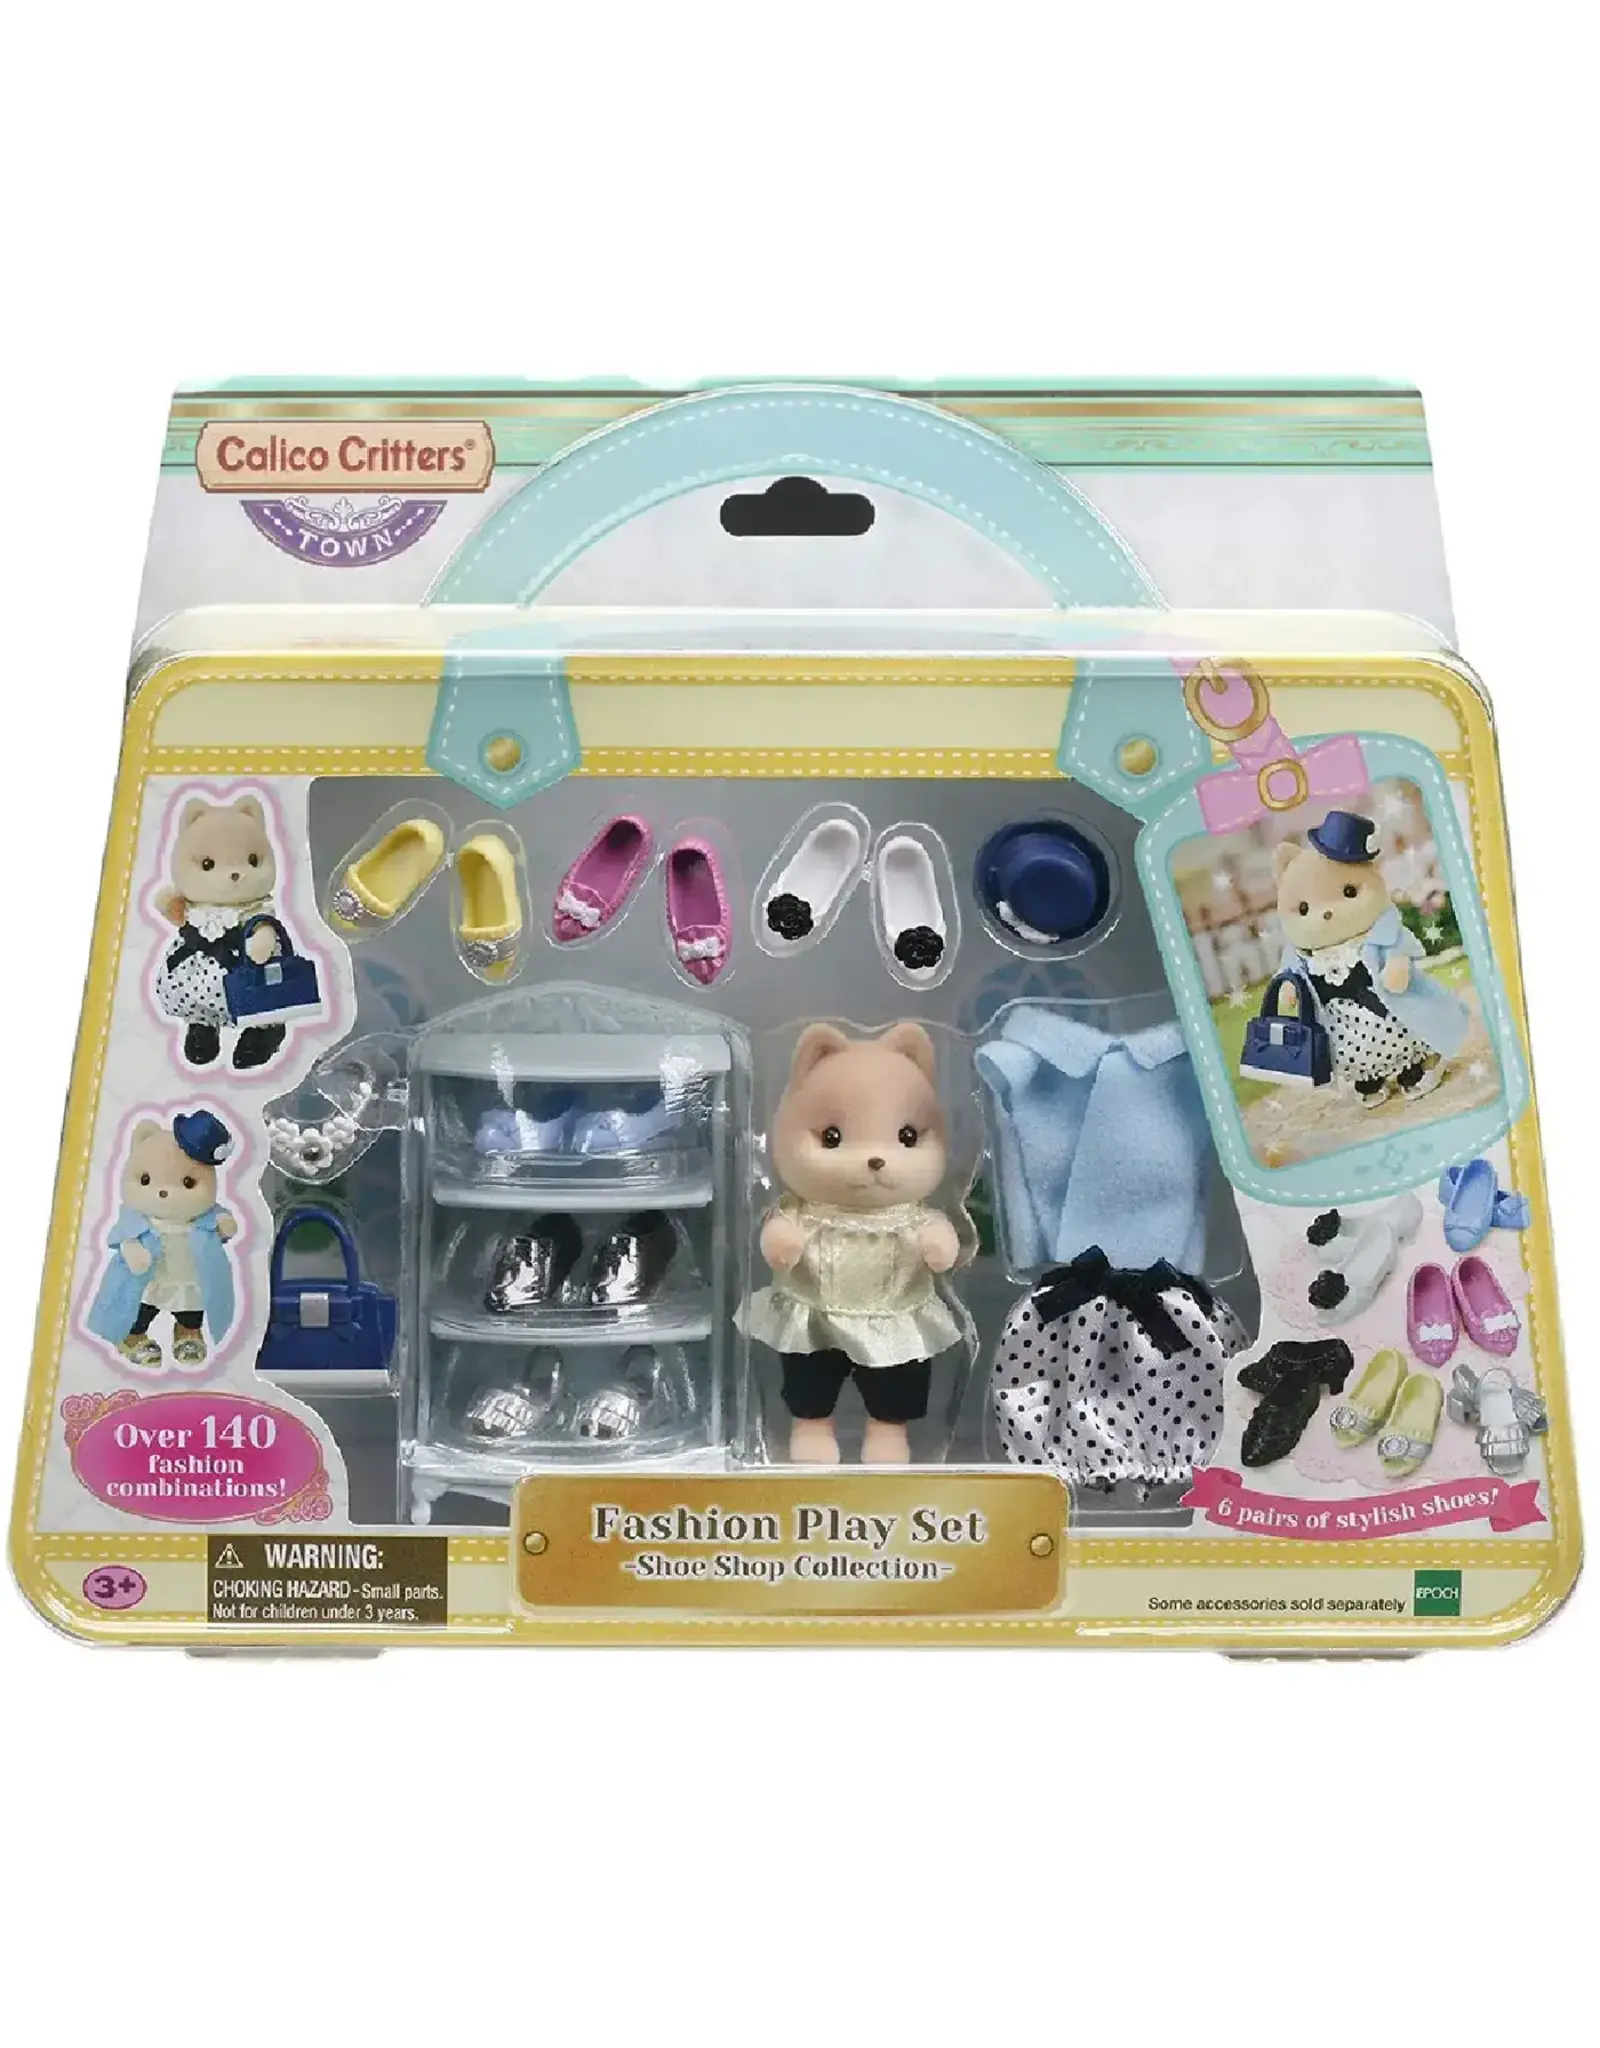 Calico Critters Calico Critters Shoe Shop Collection Fashion Playset